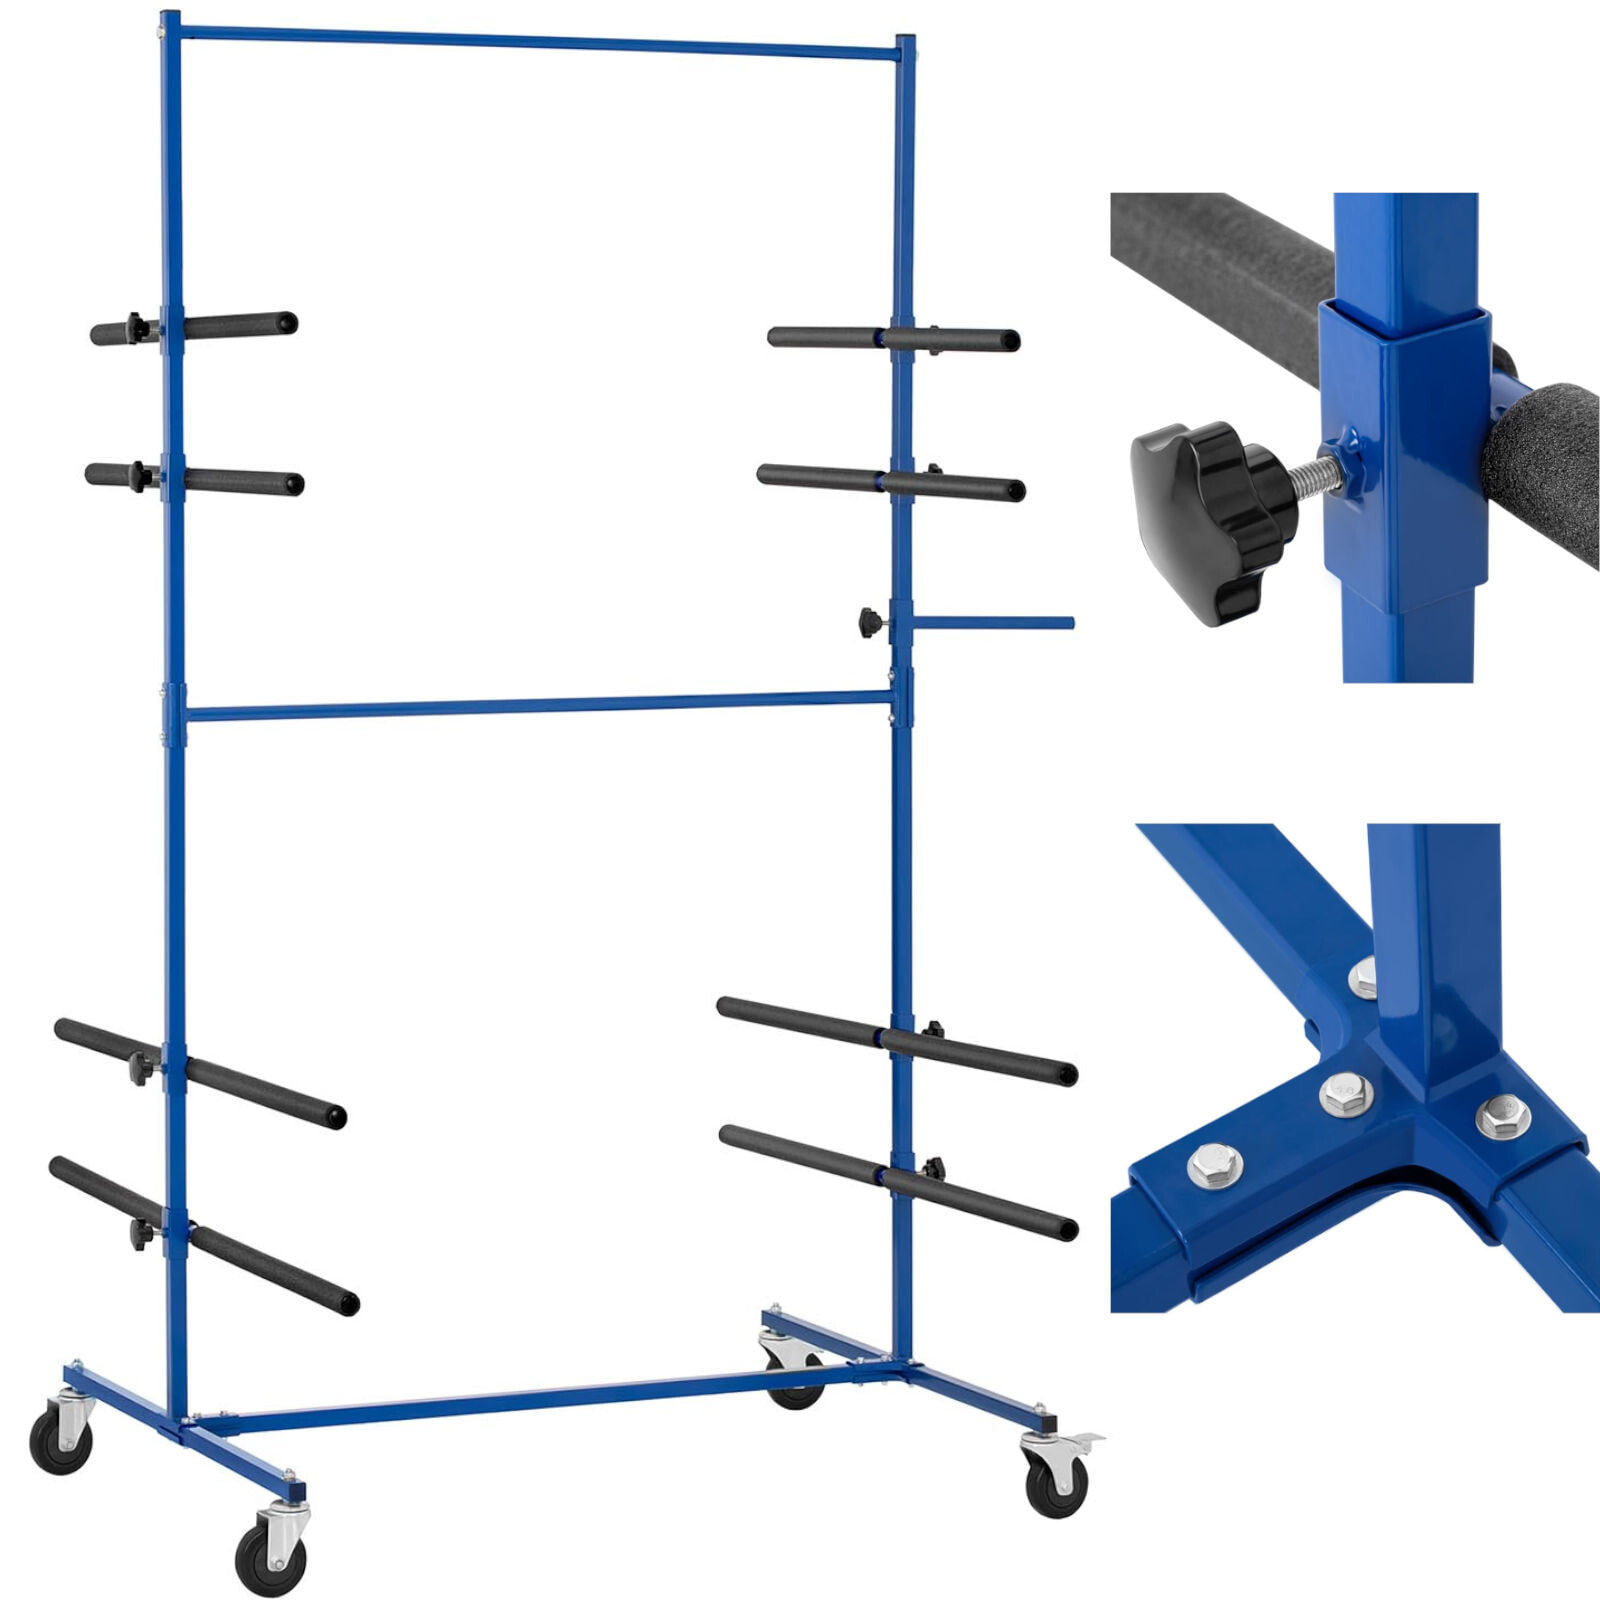 Stand, two-sided paint rack for spoiler bumpers, up to 120 kg